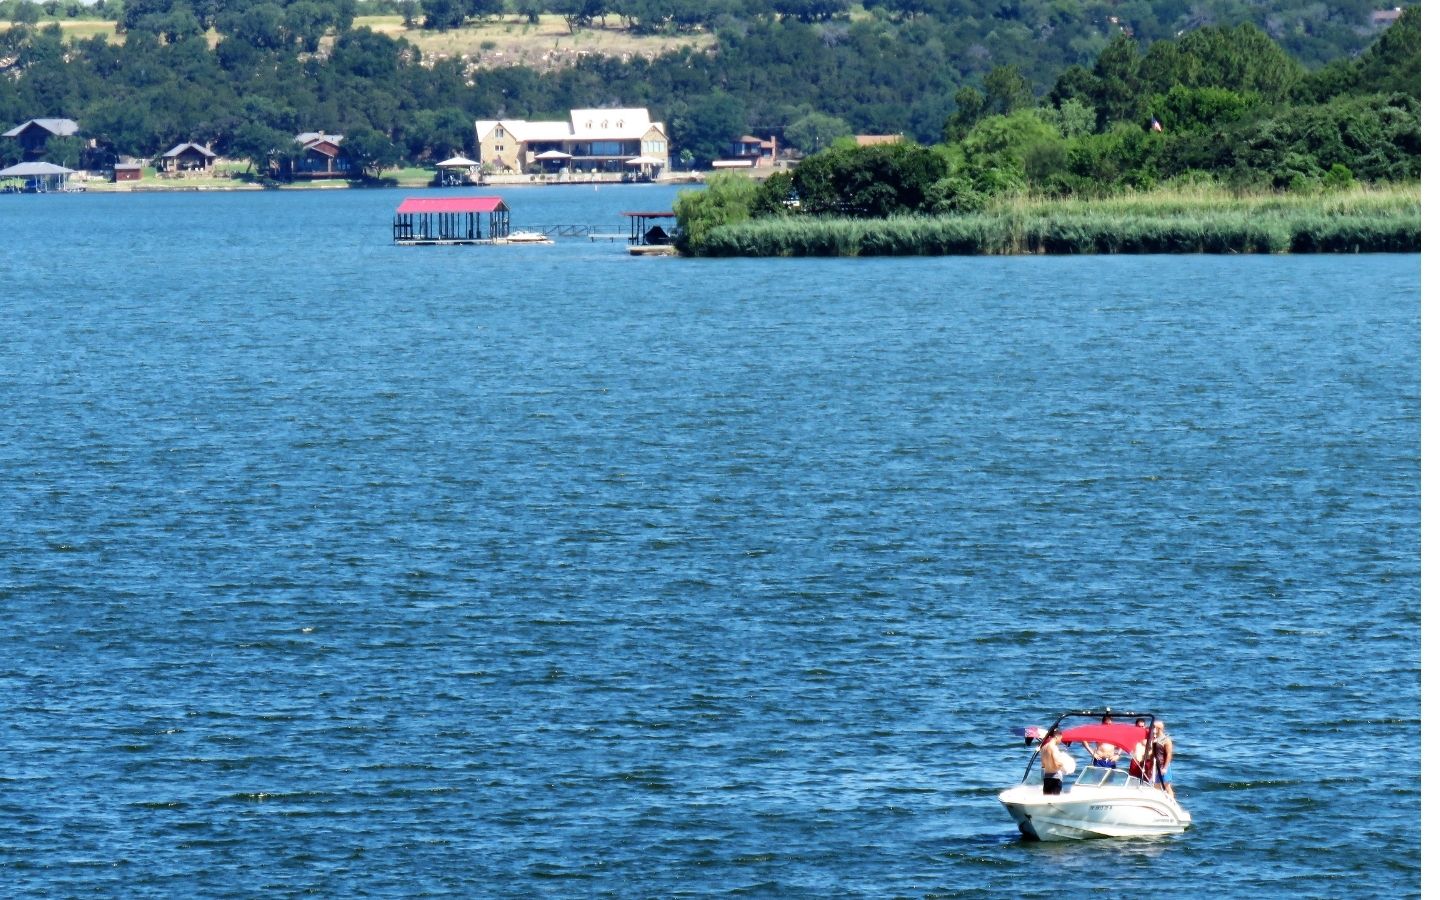 View of Lake Granbury with deep green trees and boats in the water